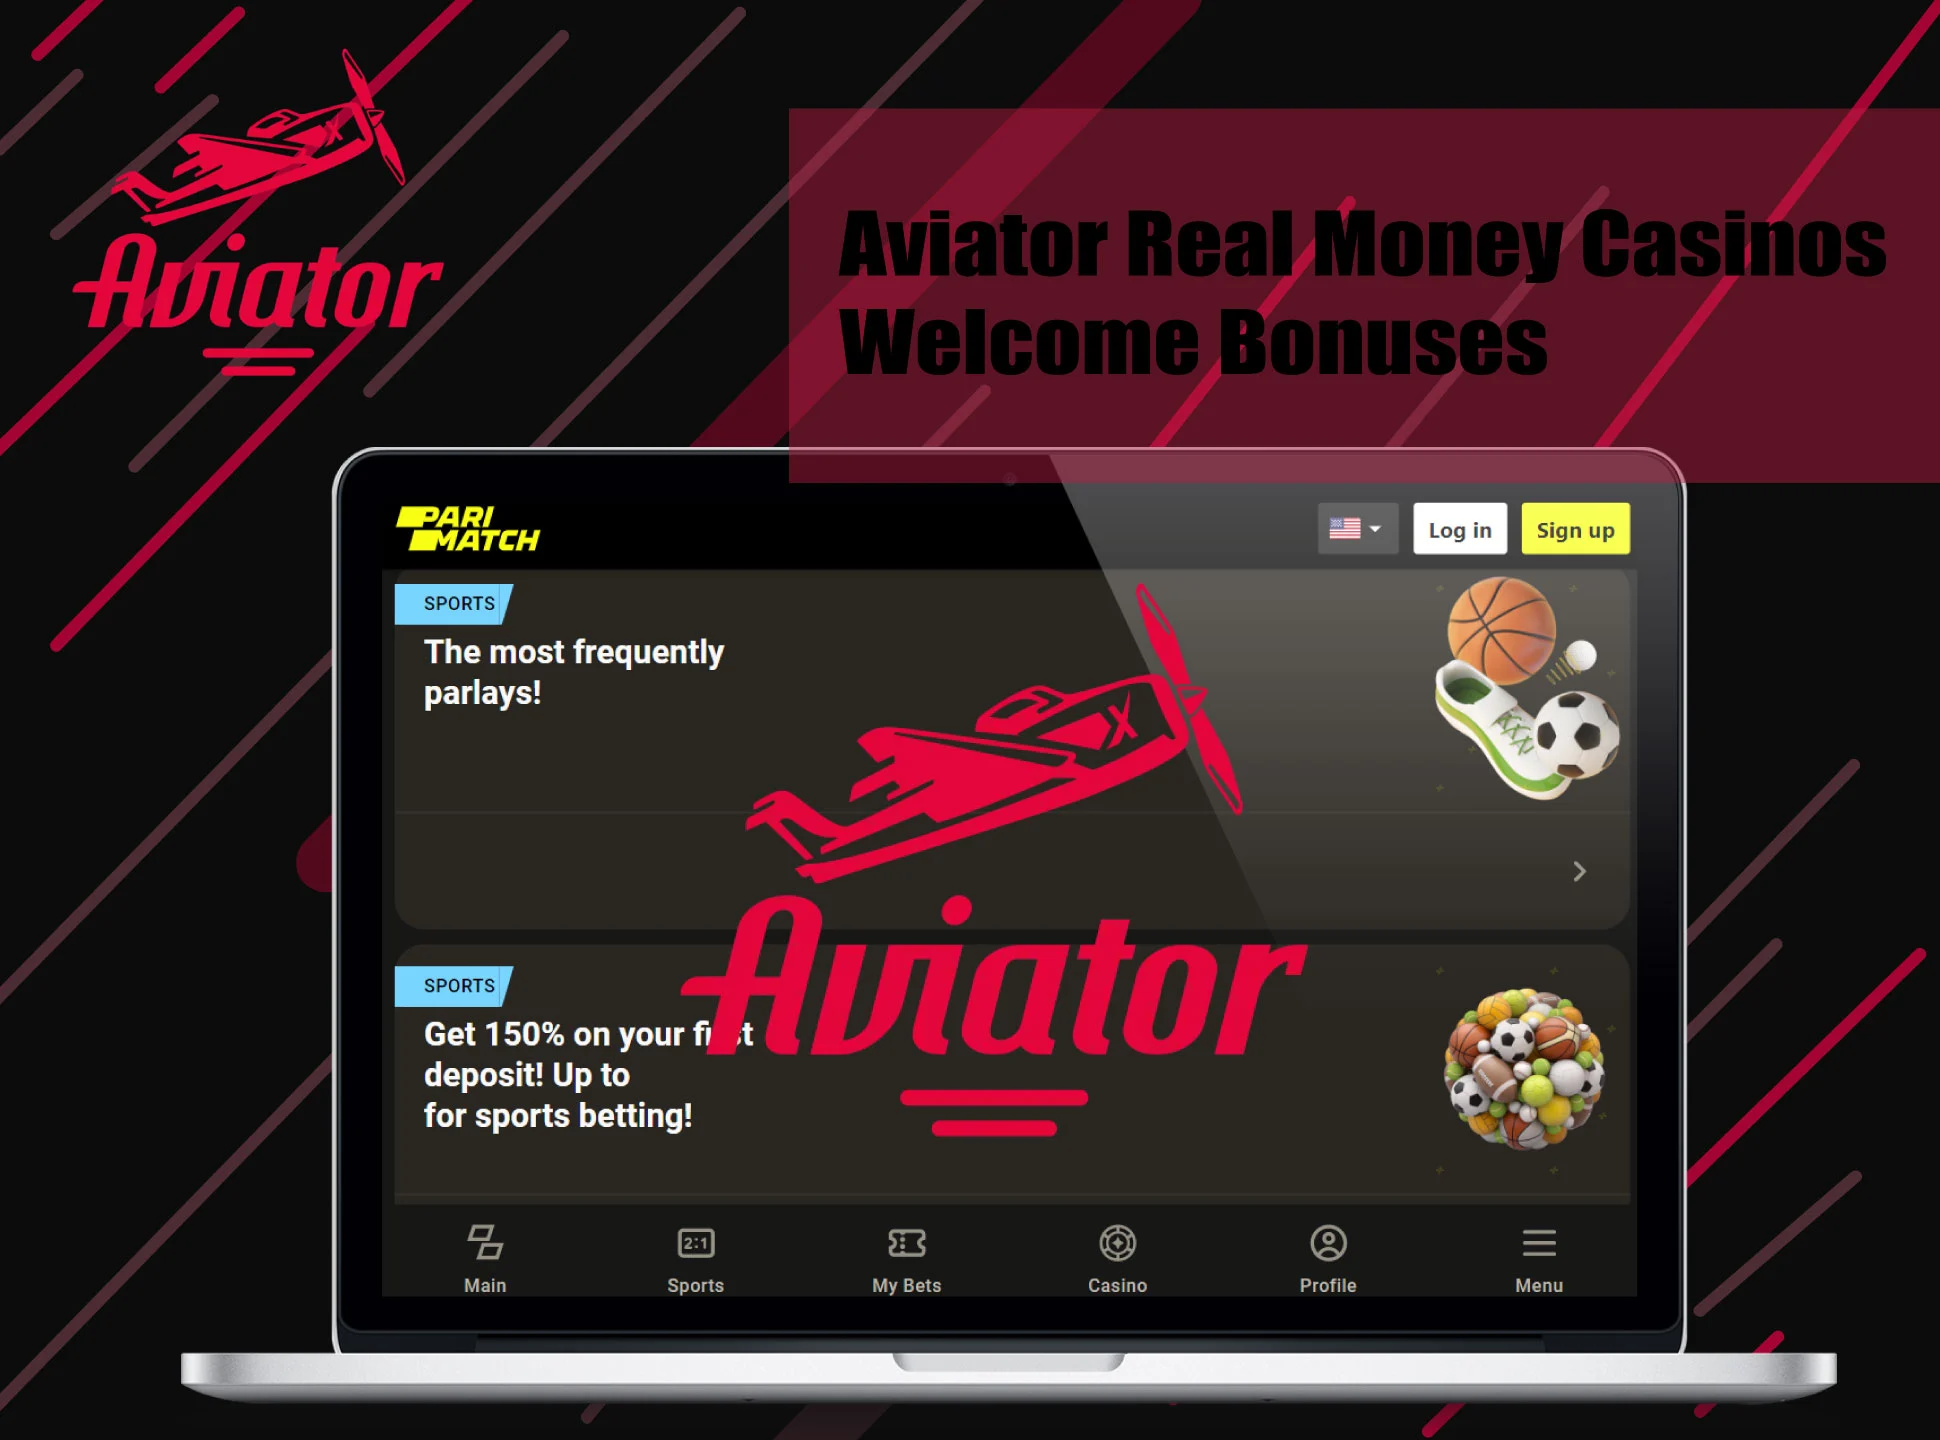 You can get up to 160,000 BDT on the Aviator game in an online casino.